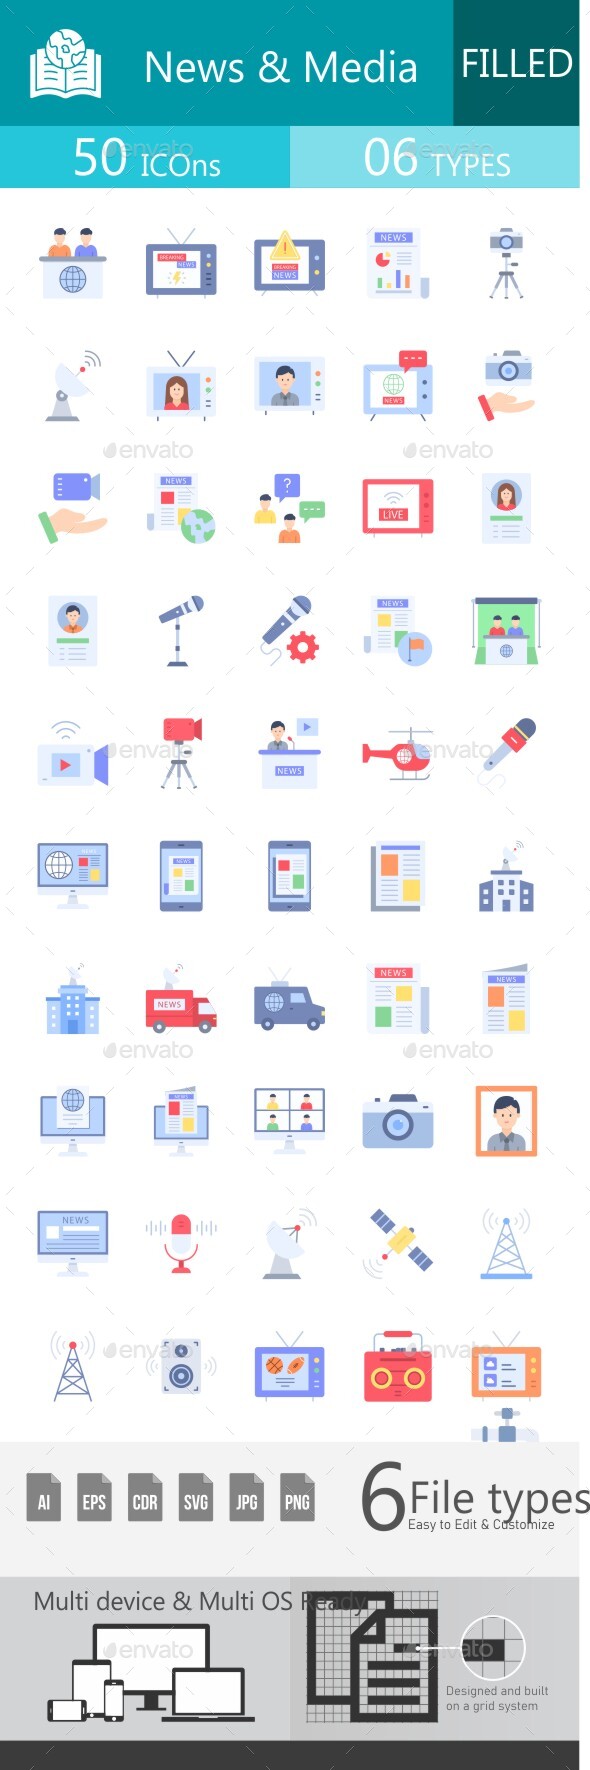 [DOWNLOAD]News & Media Flat Multicolor Icons